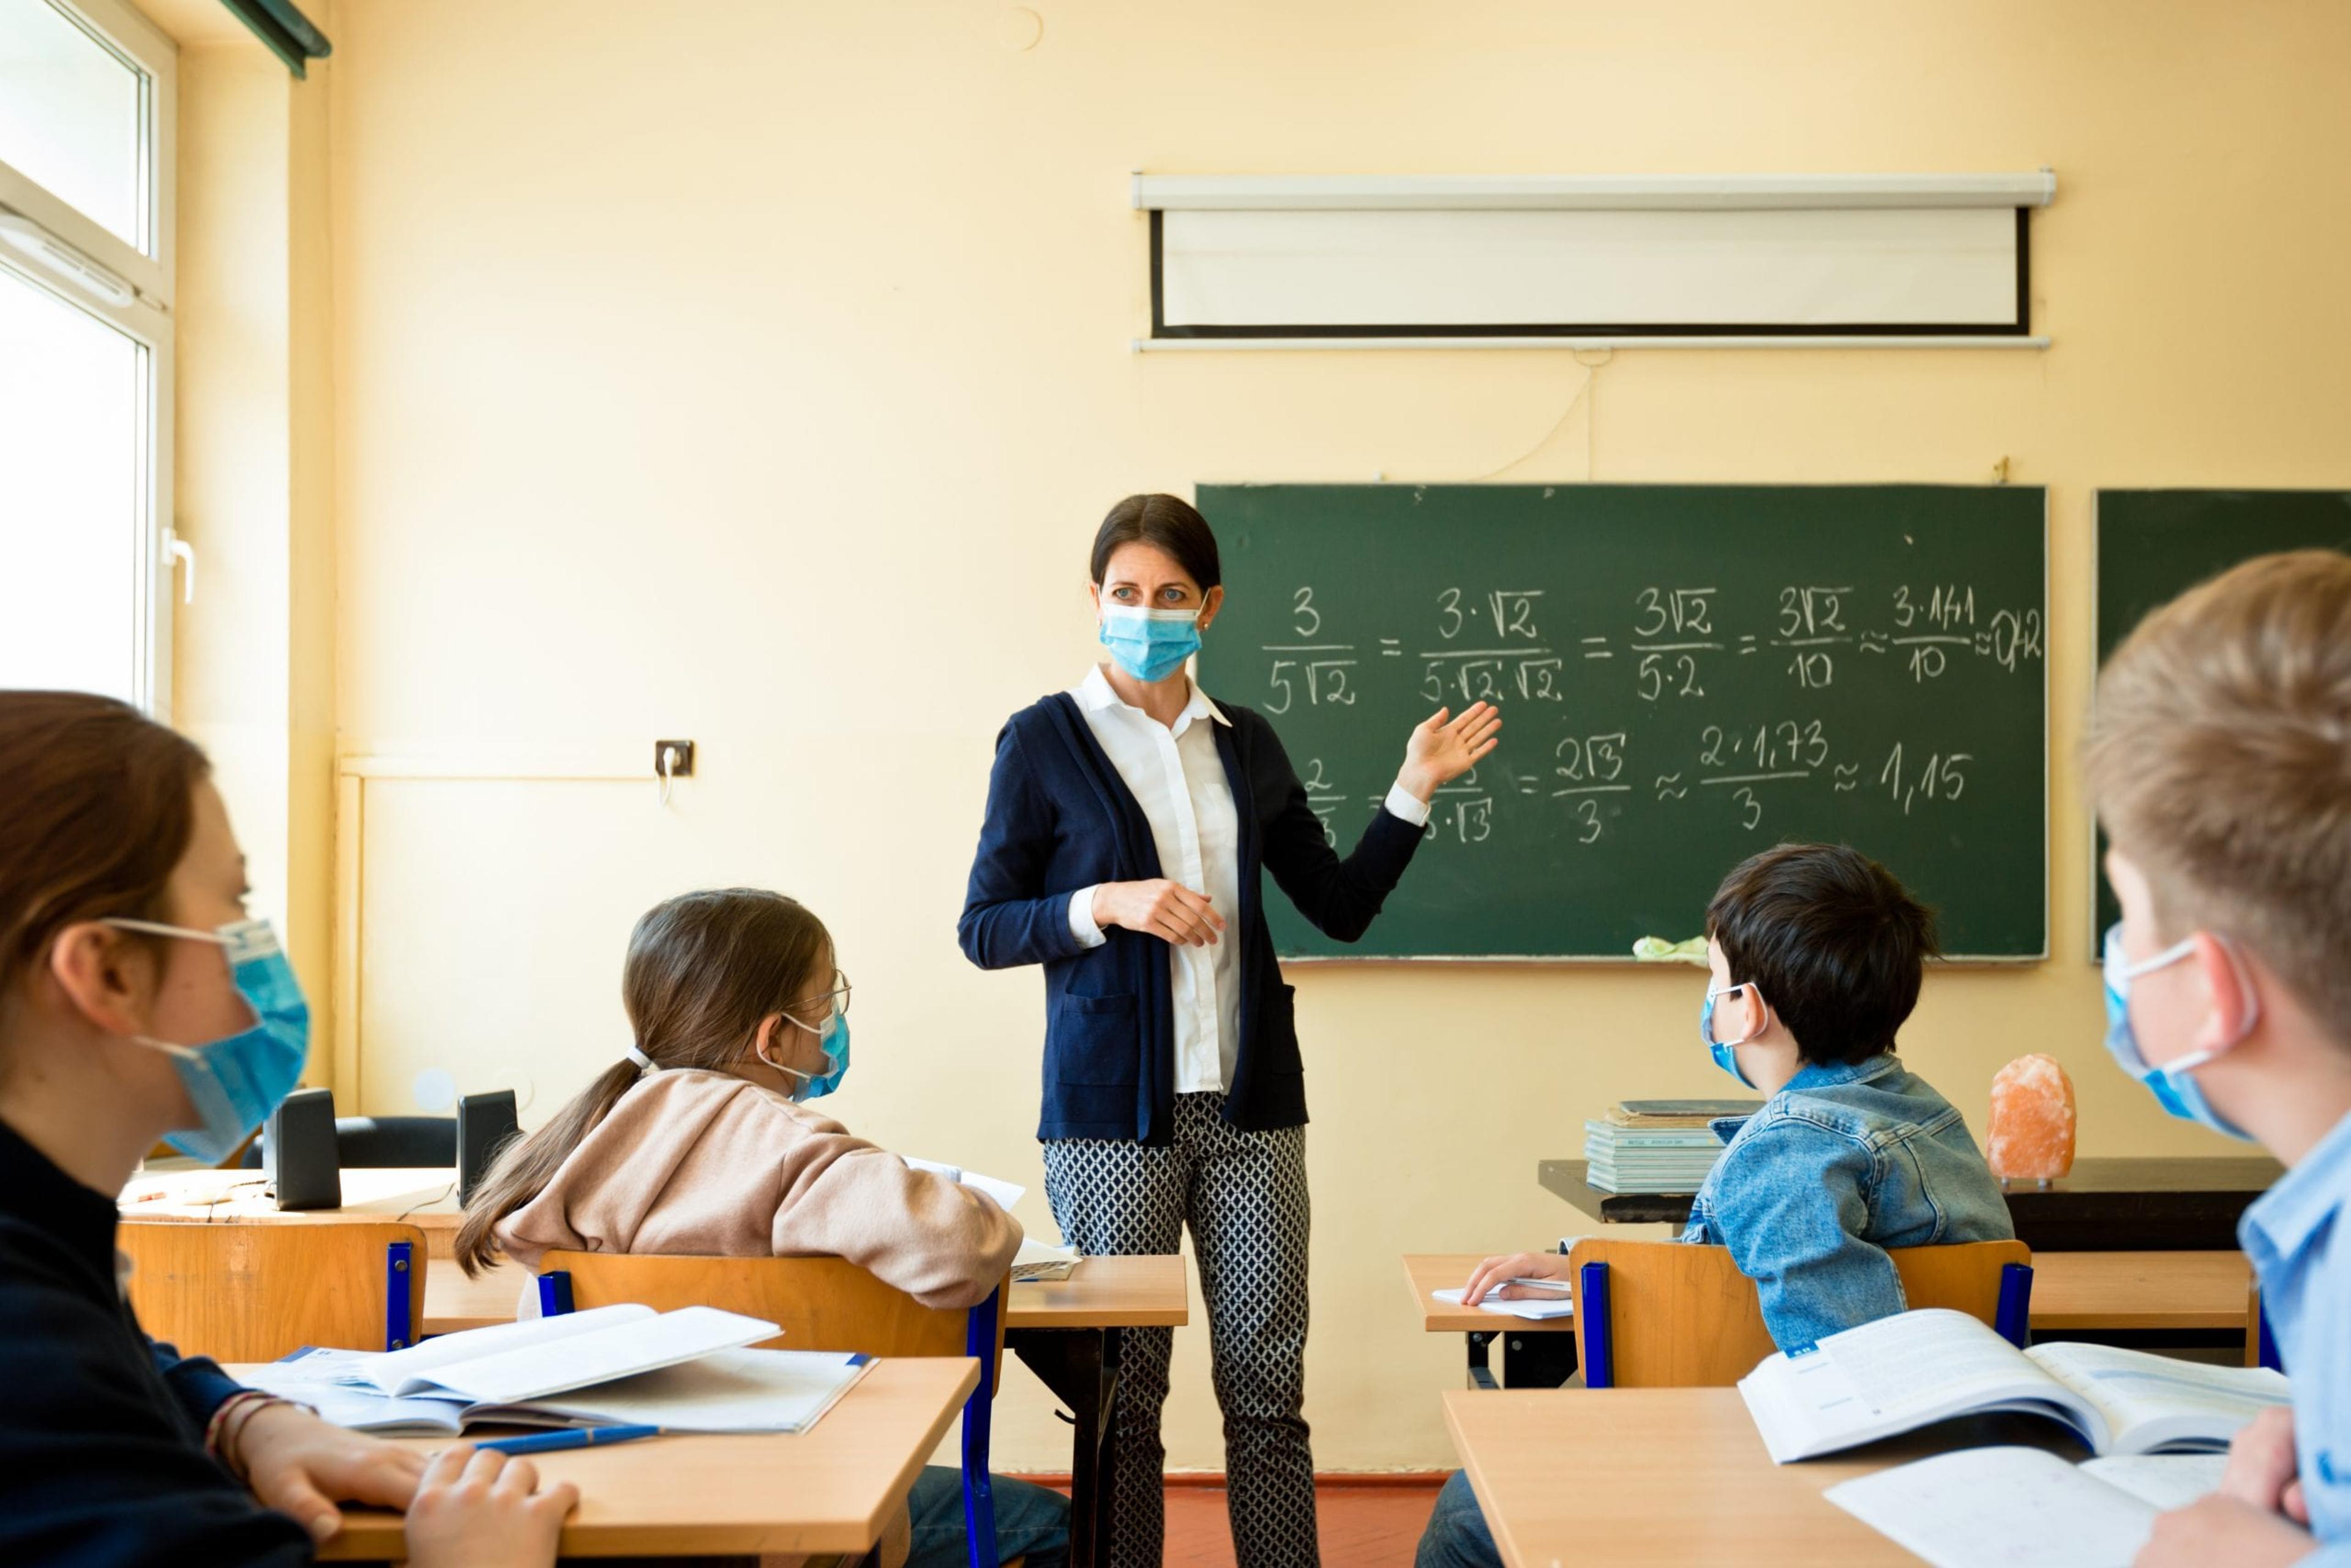 Teacher standing in front of class wearing a mask